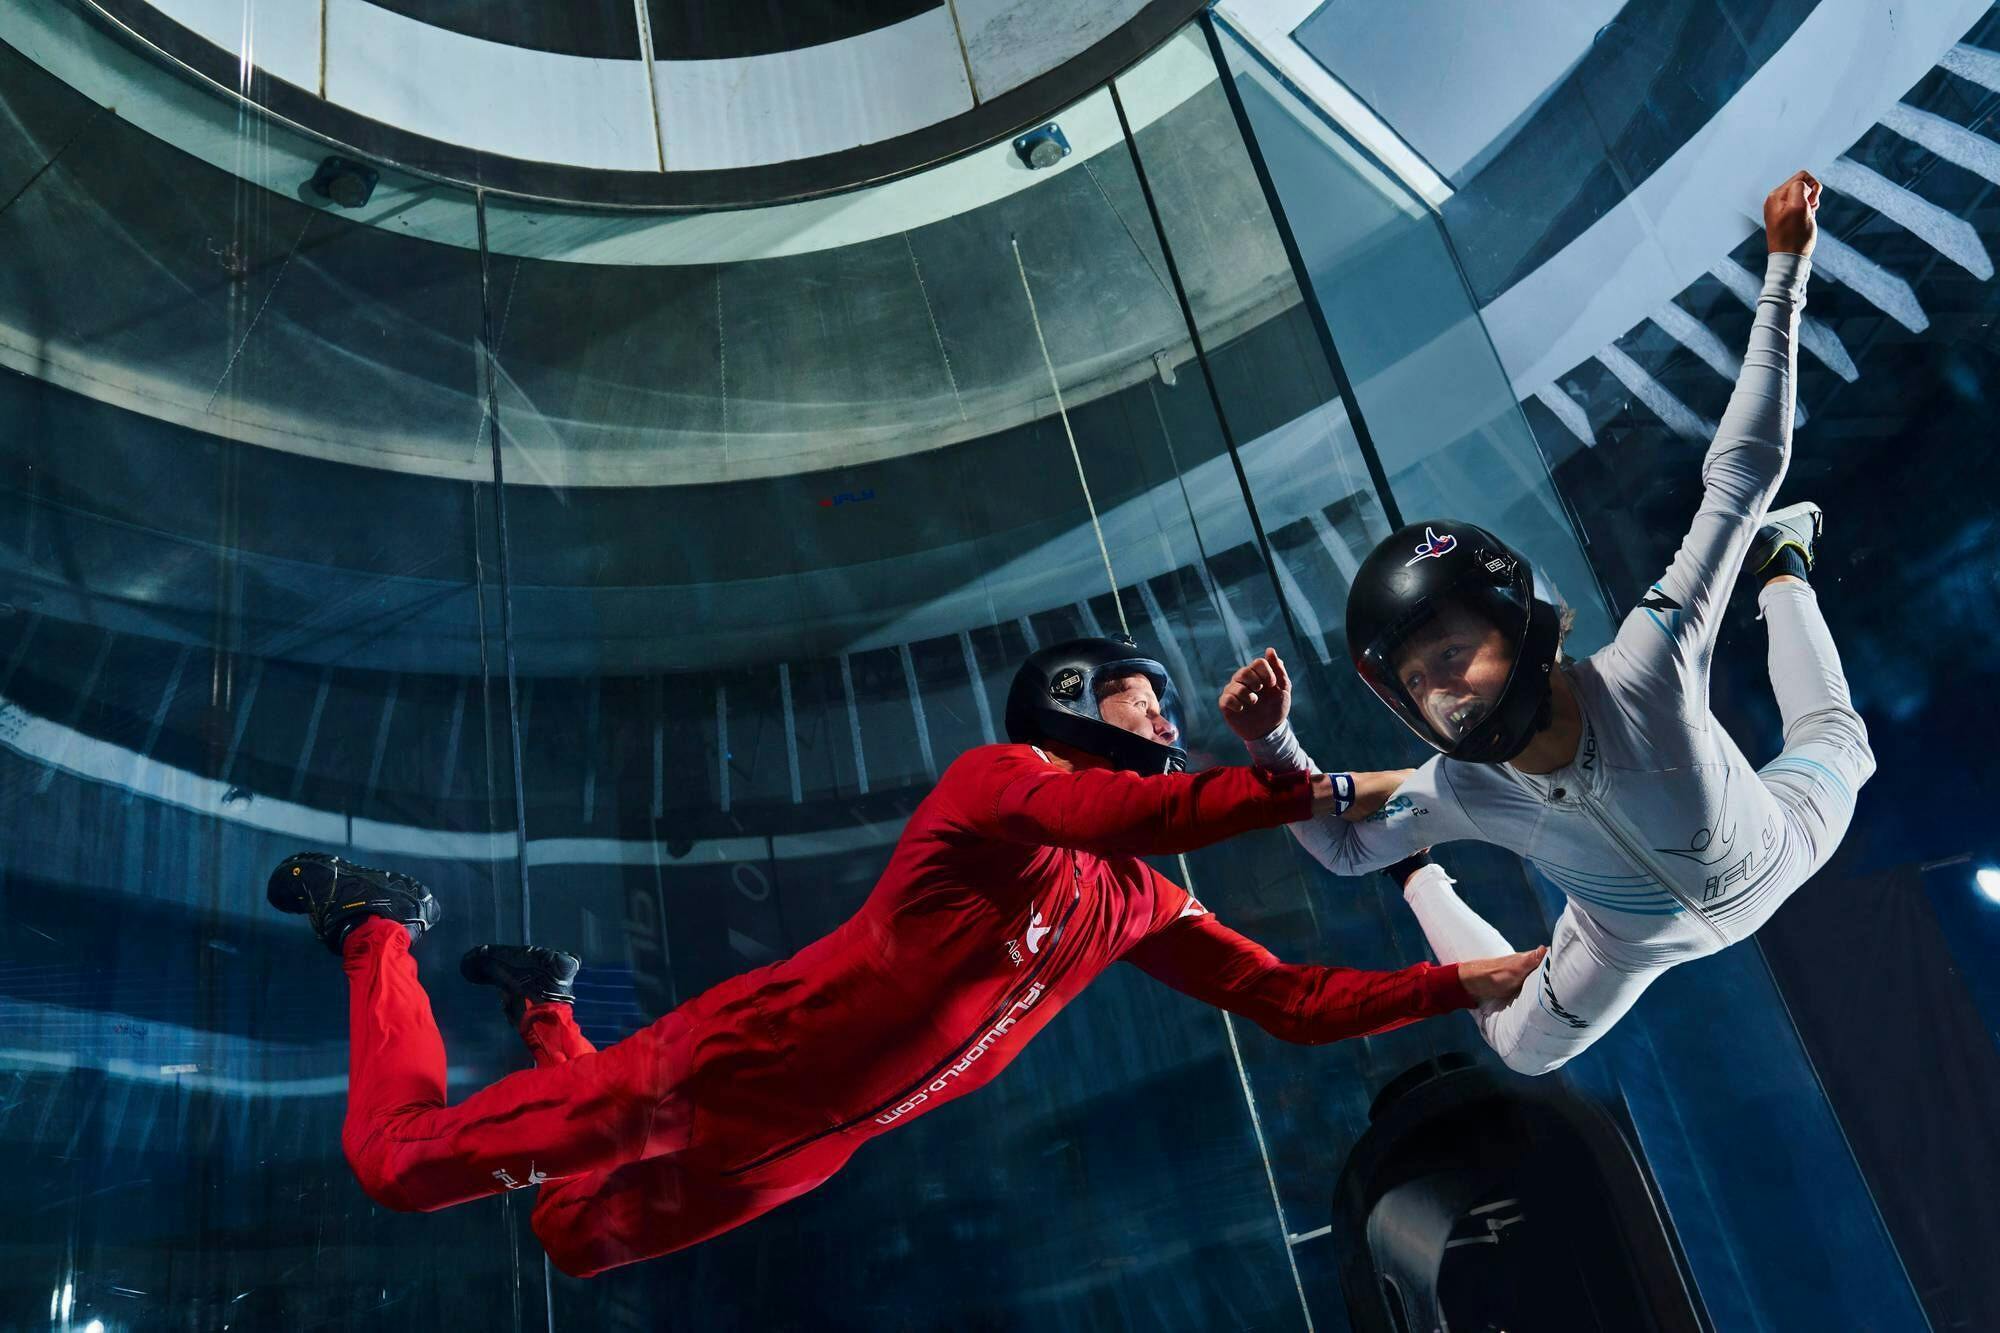 iFLY Chicago Lincoln Park indoor skydiving experience Musement